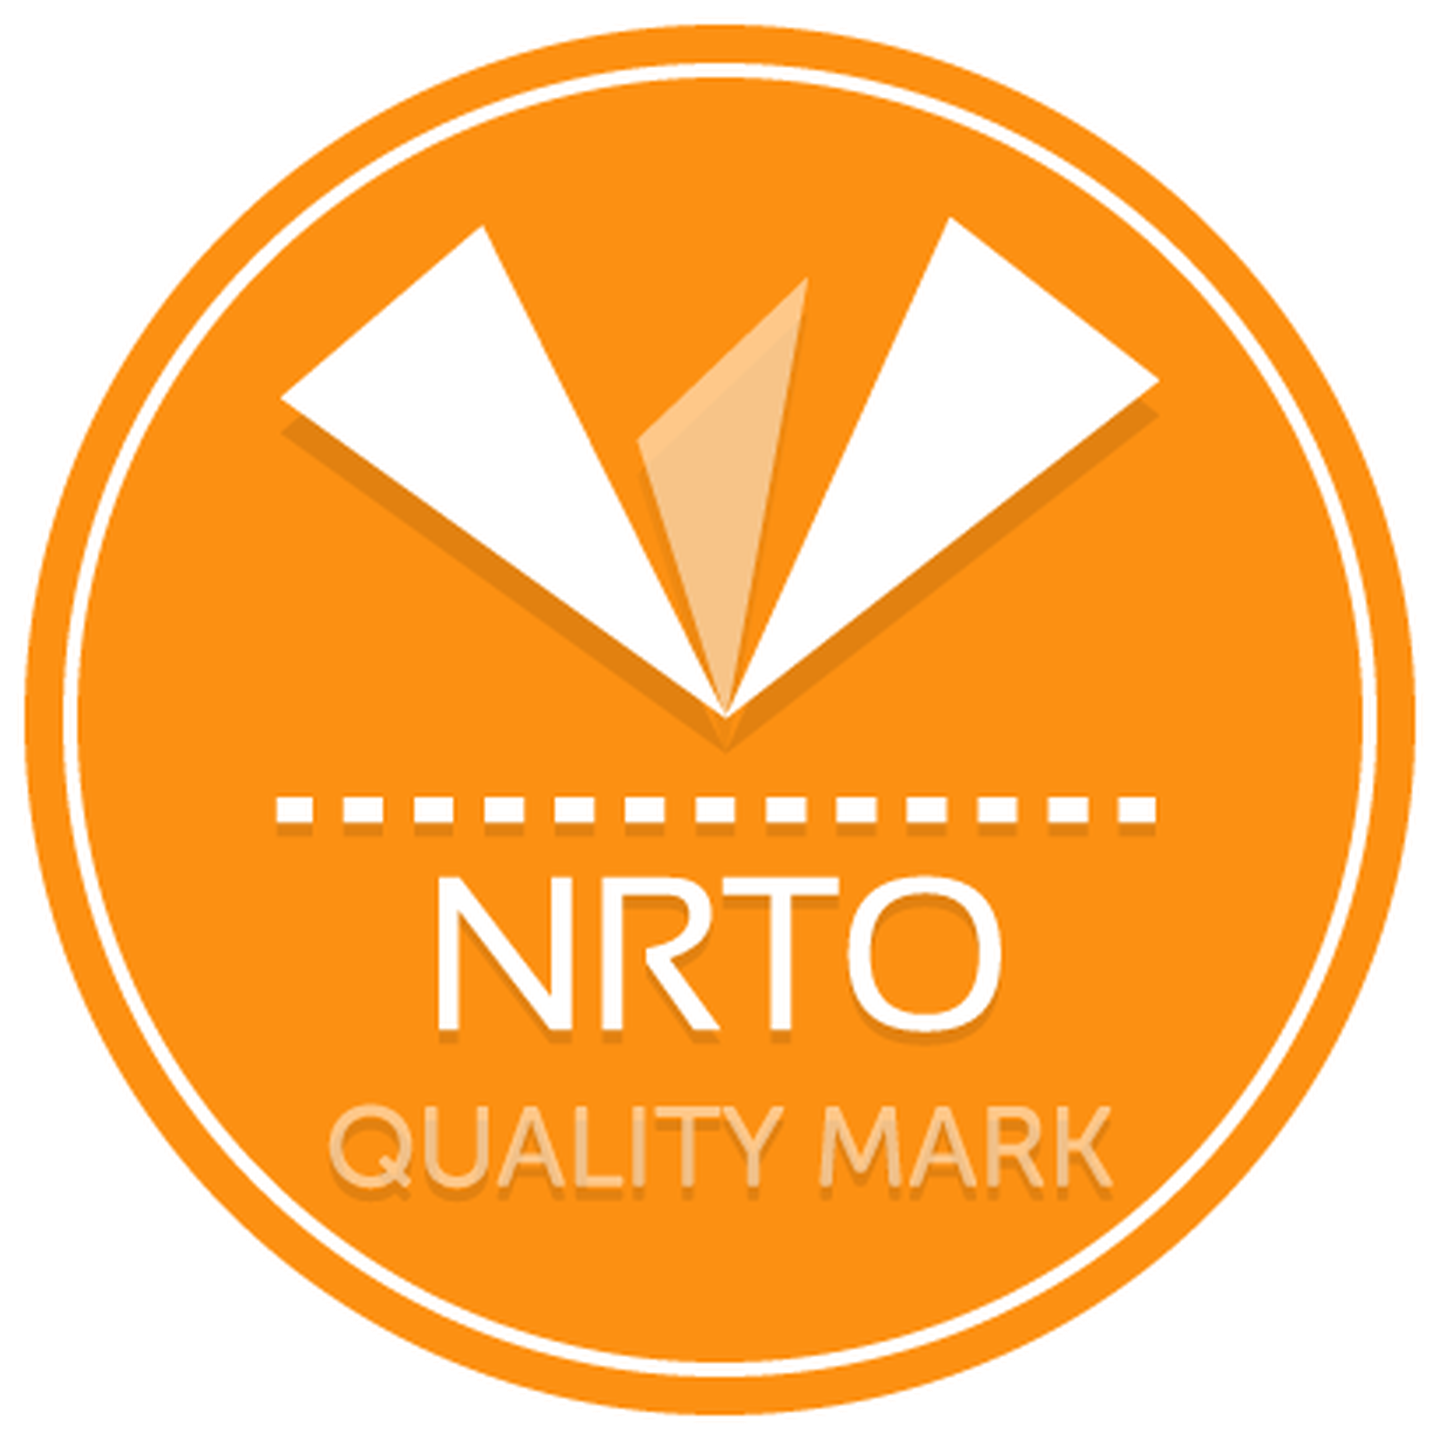 NRTO-QUALITY-MARK_Mischief_Makers_Leading_Groups_Facilitation_Course_Hybrid